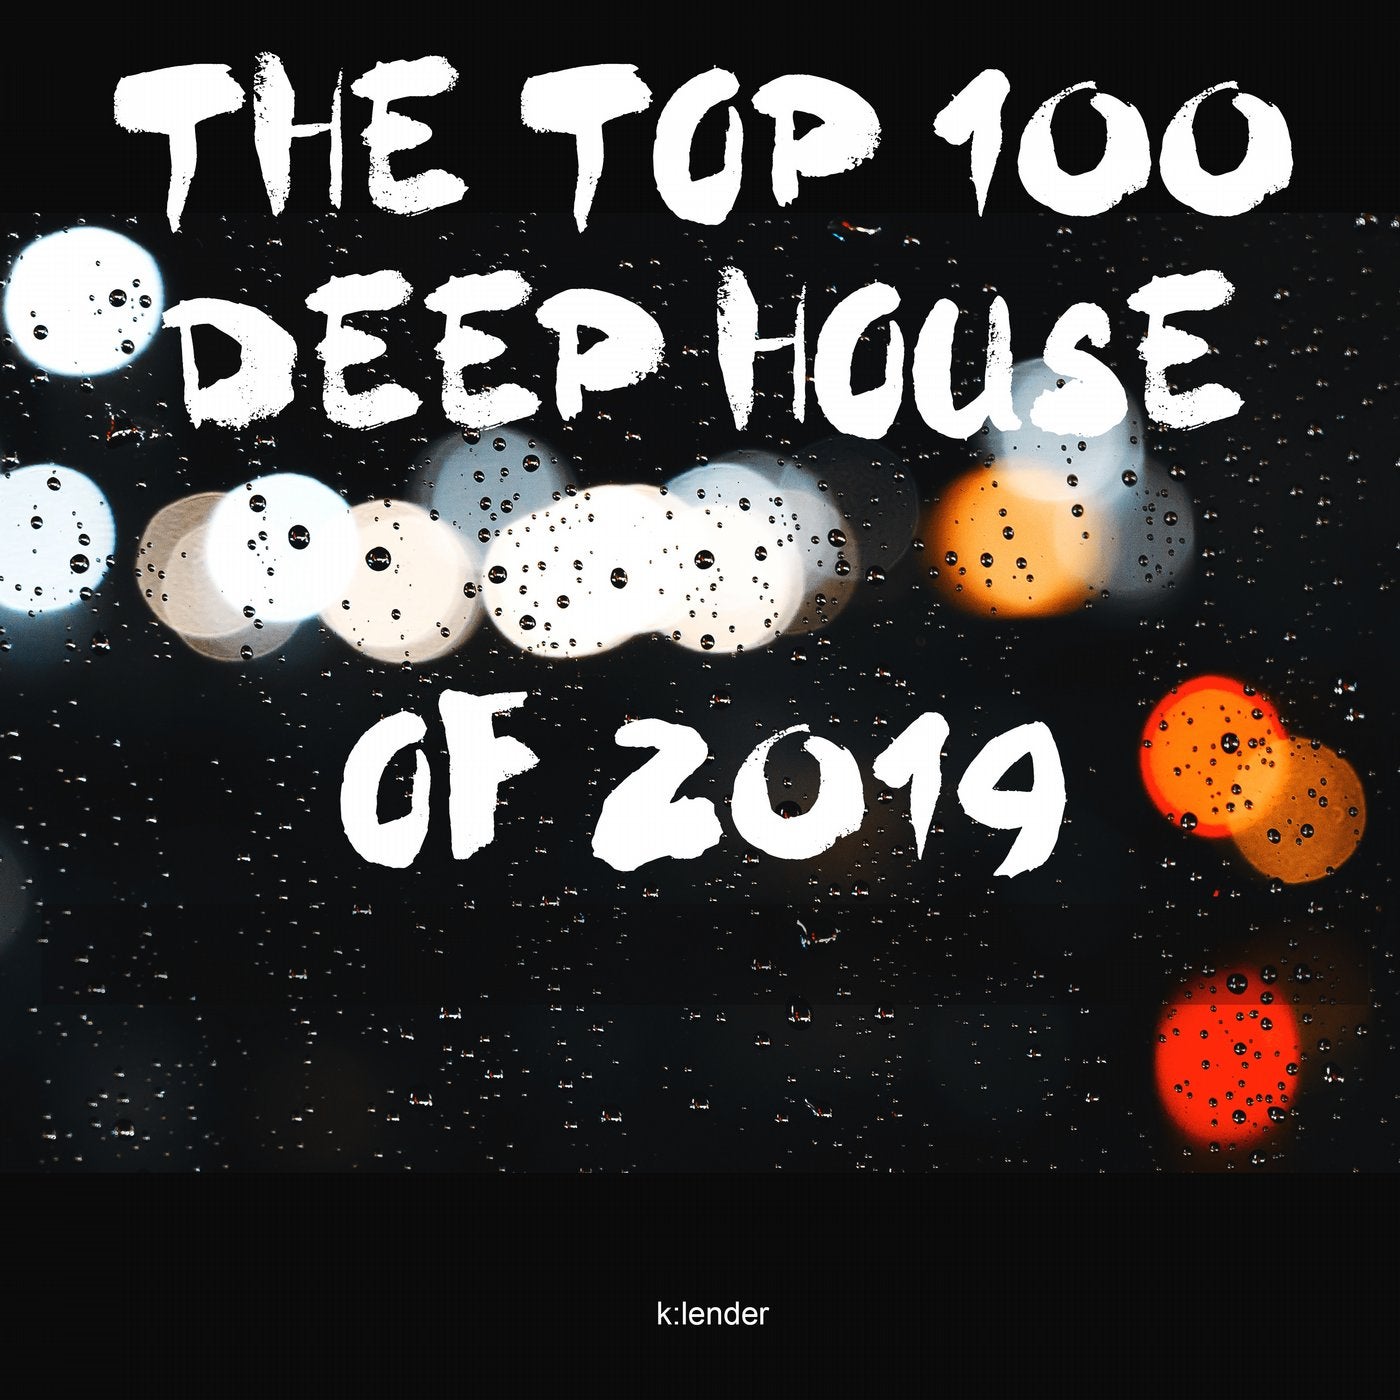 The Top 100 Deep House of 2019